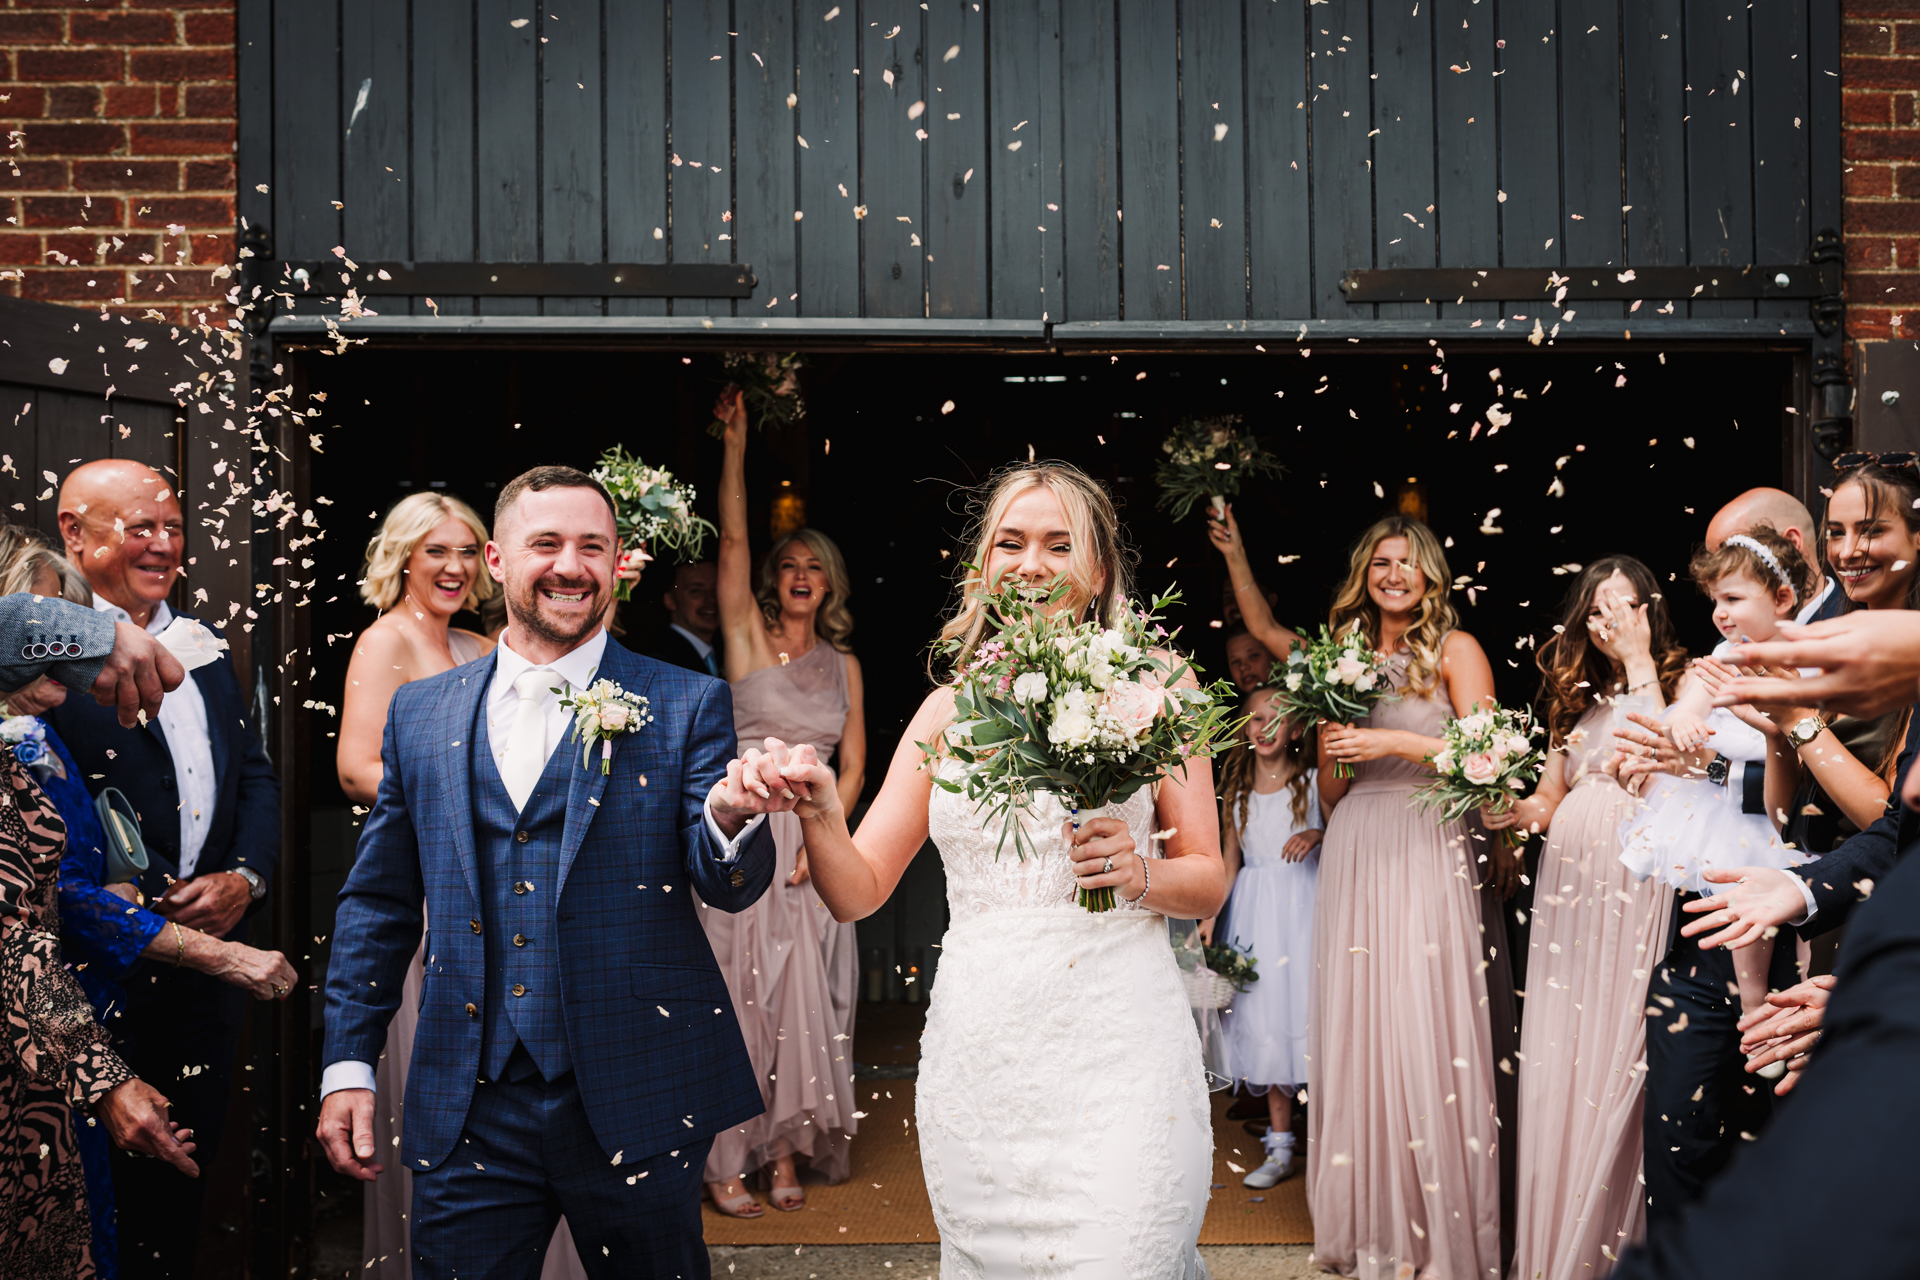 Bride and groom laugh amongst confetti after the Milling Barn wedding ceremony